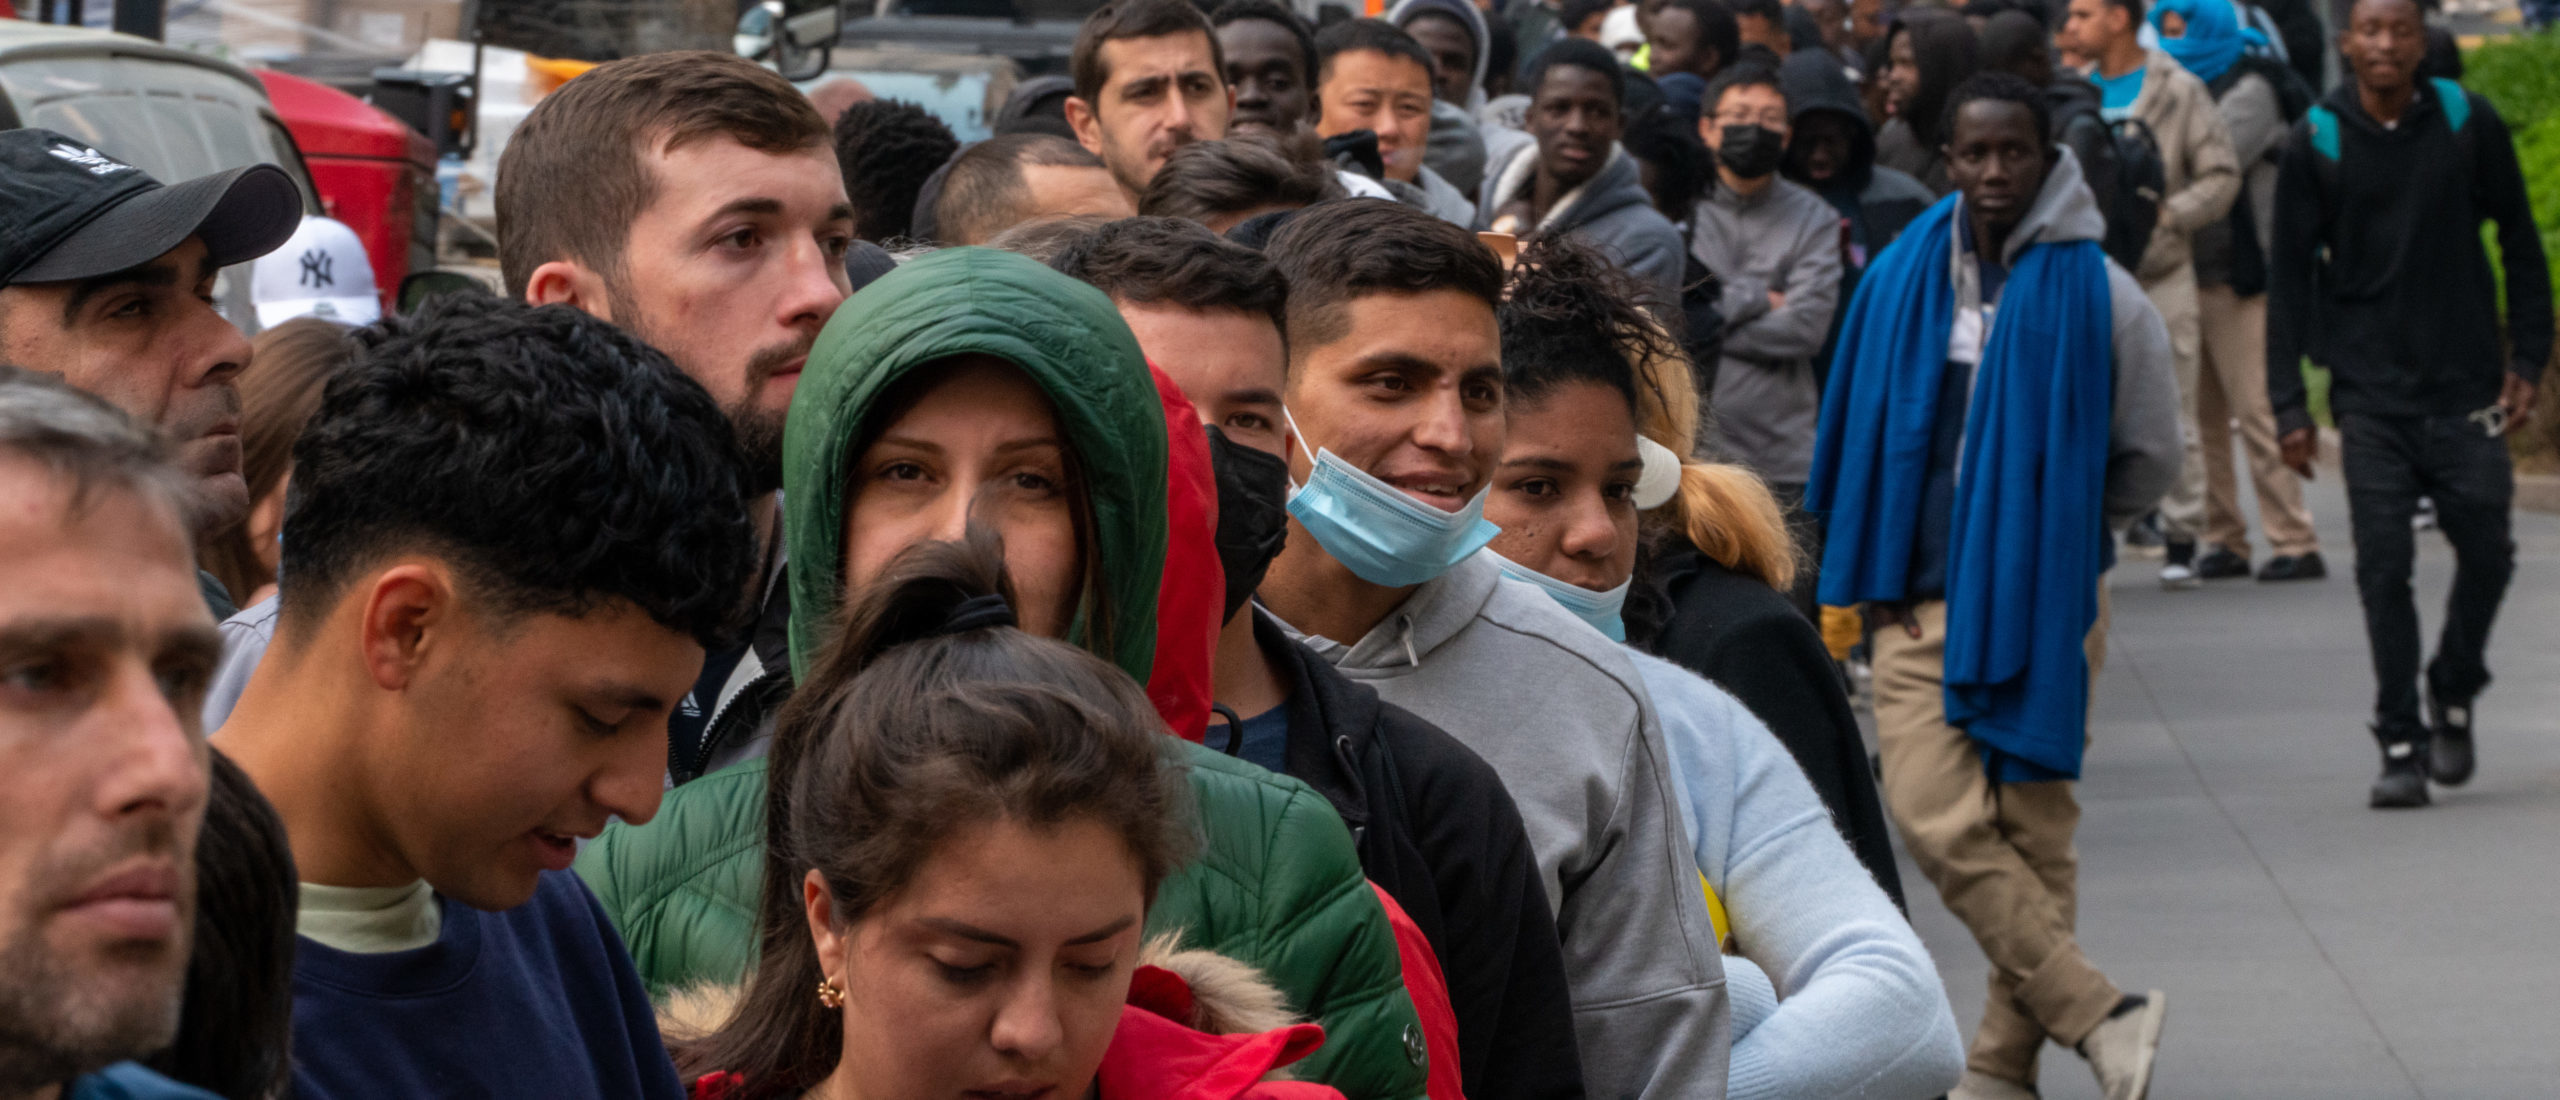 NEW YORK, NEW YORK - JUNE 6:Asylum Seeking Migrants Wait In Line For Immigration Customs Enforcement Appointments (Photo by David Dee Delgado/Getty Images)